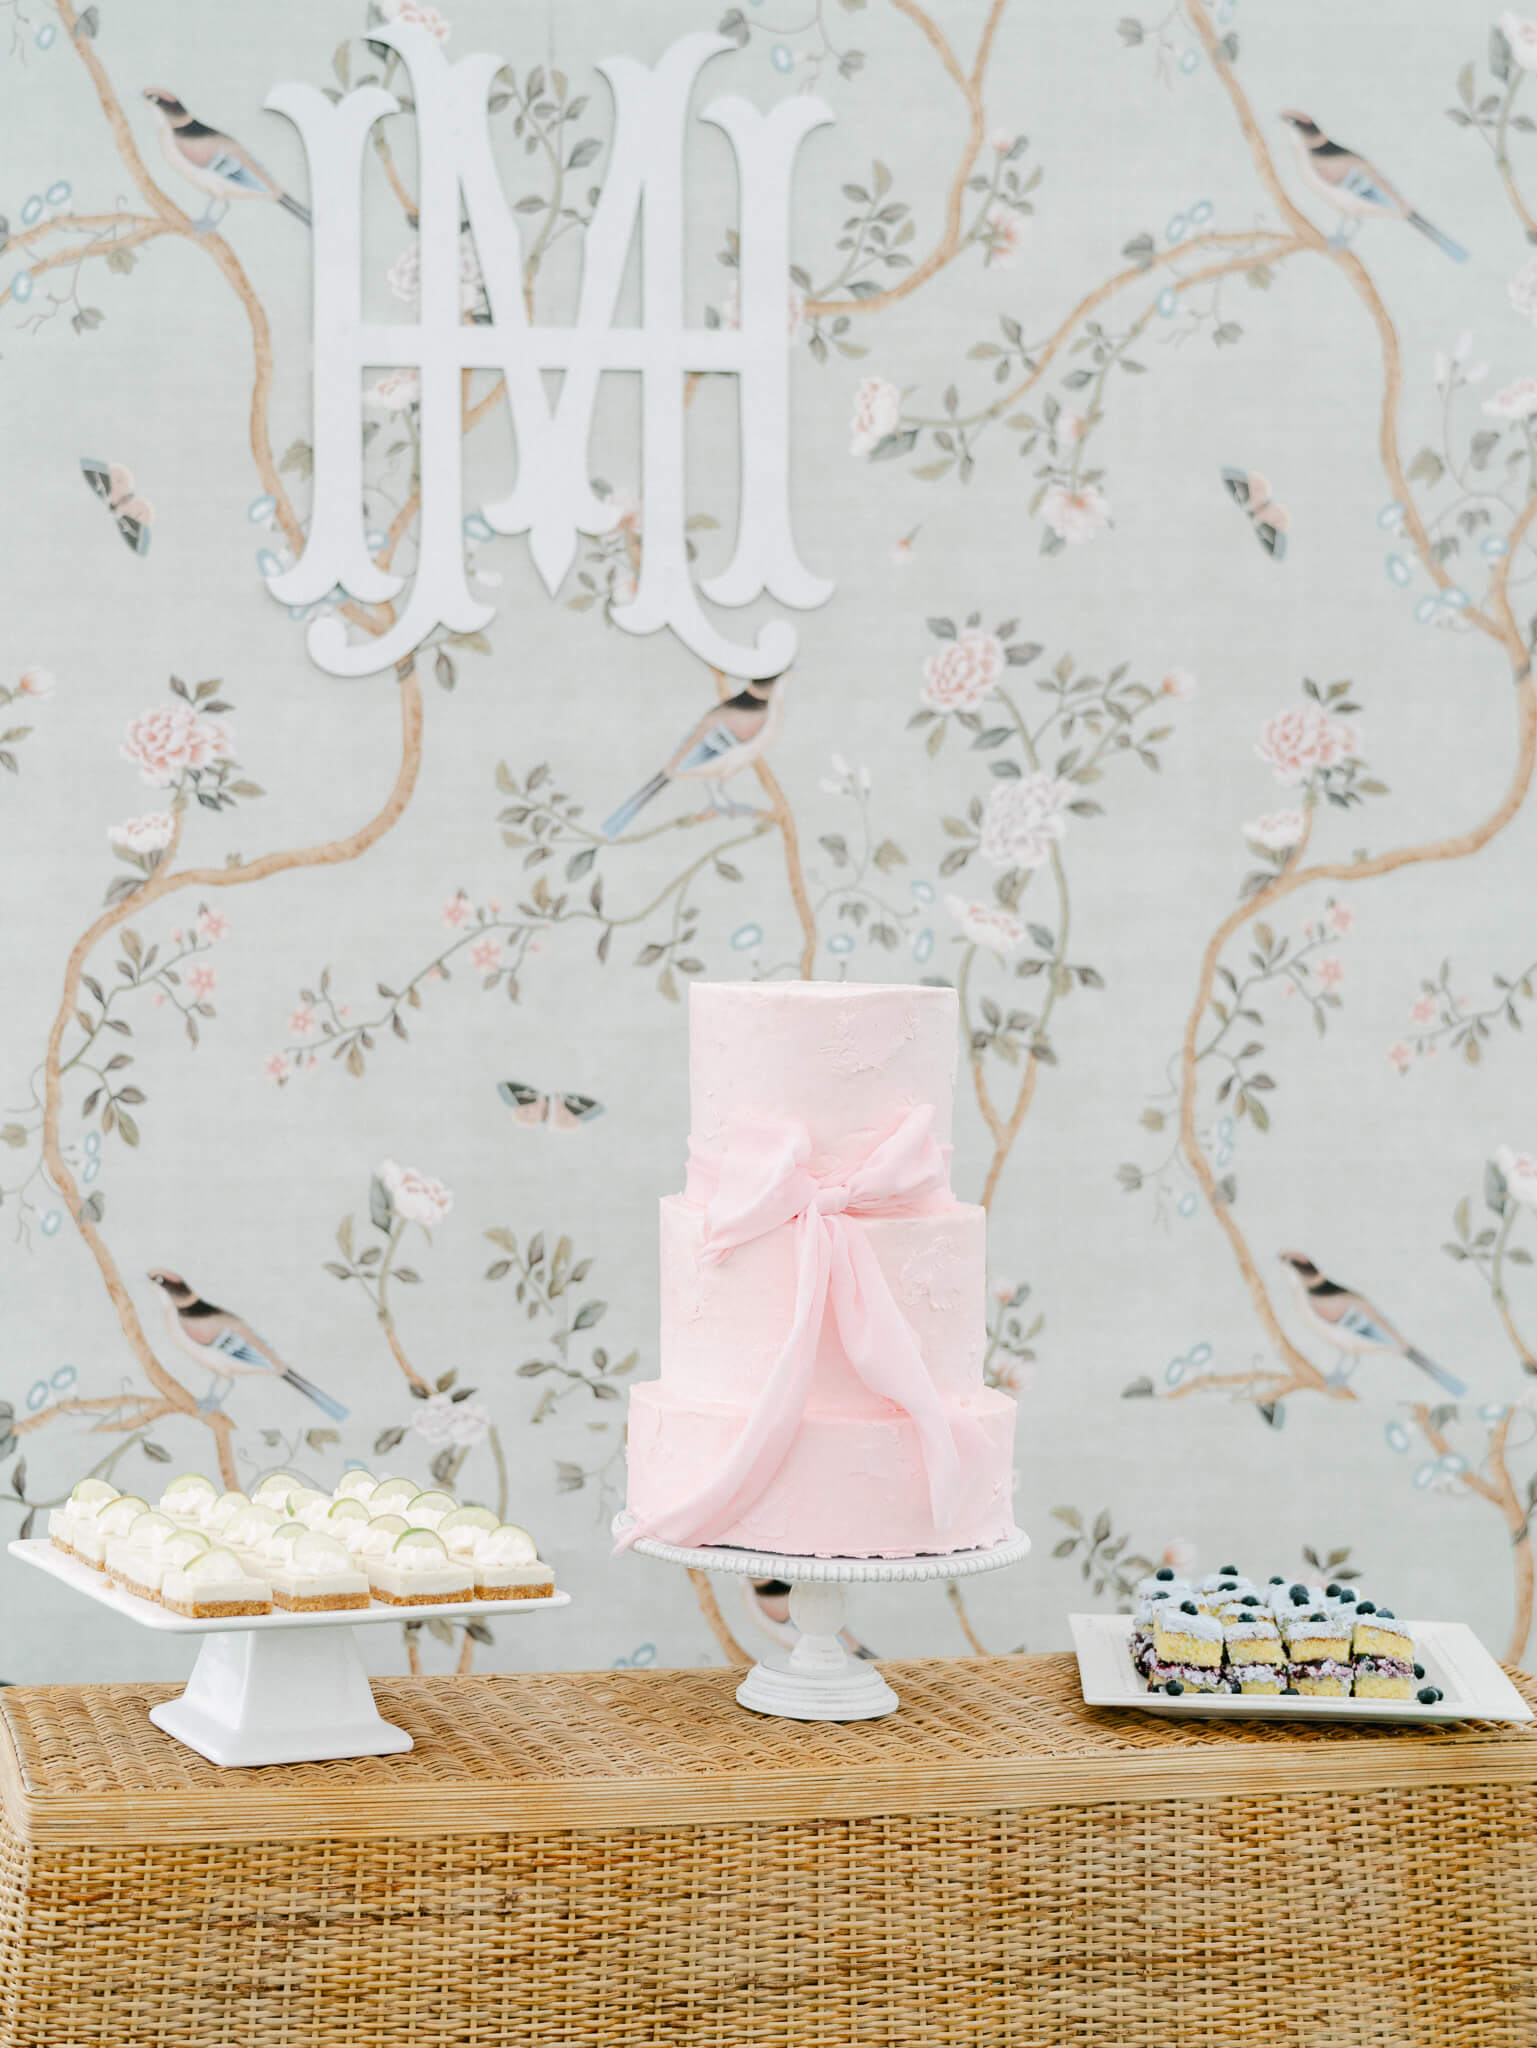 A pink three tier cake with a bow on it and desserts to each side in front of a mint chinoiserie monogrammed background.